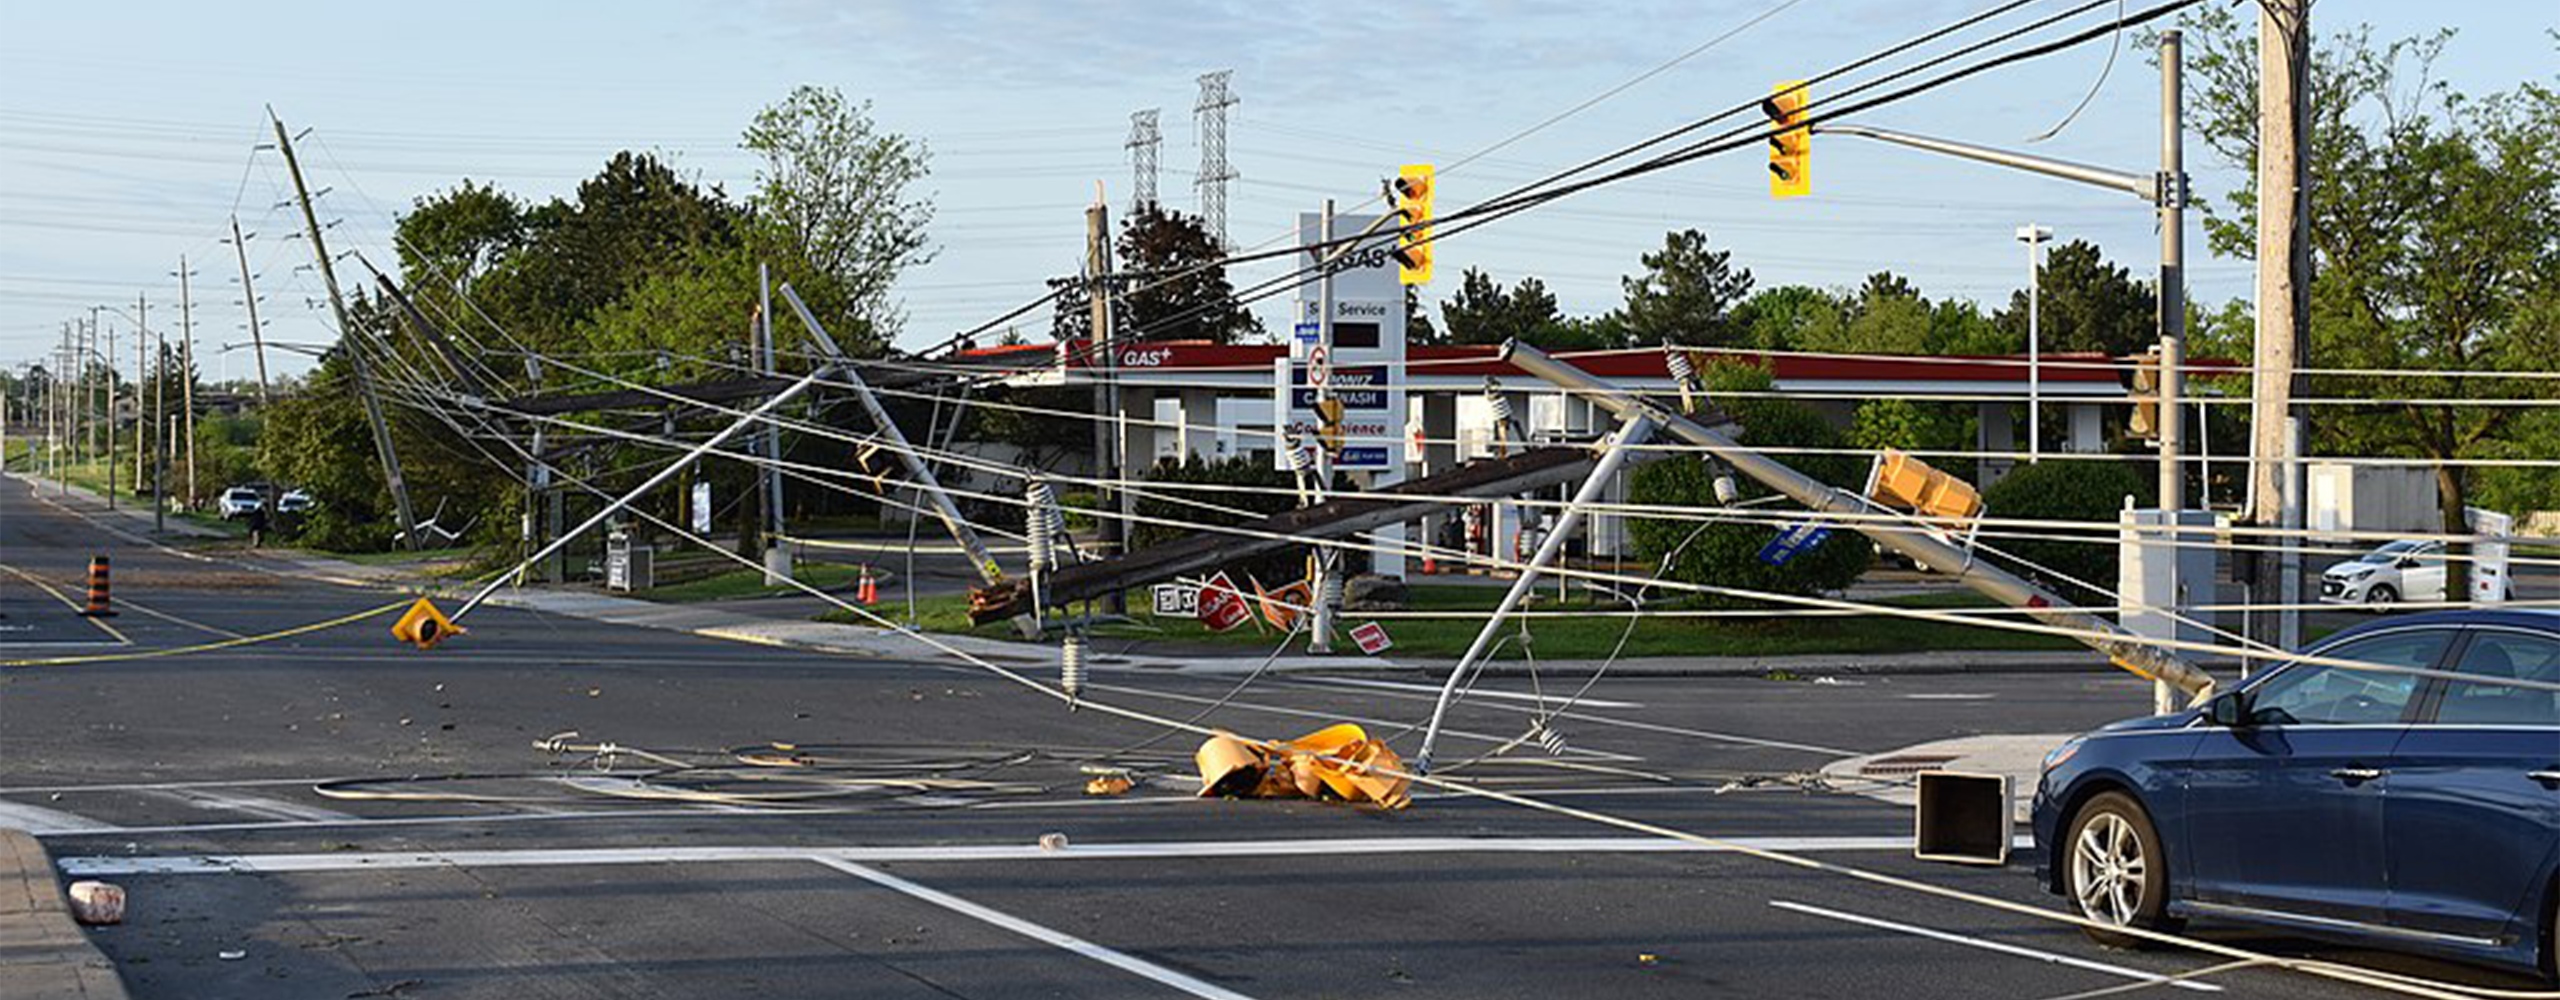 Powerlines lie across the road and trap a vehicle after a derecho passed through Ottawa in May 2022.